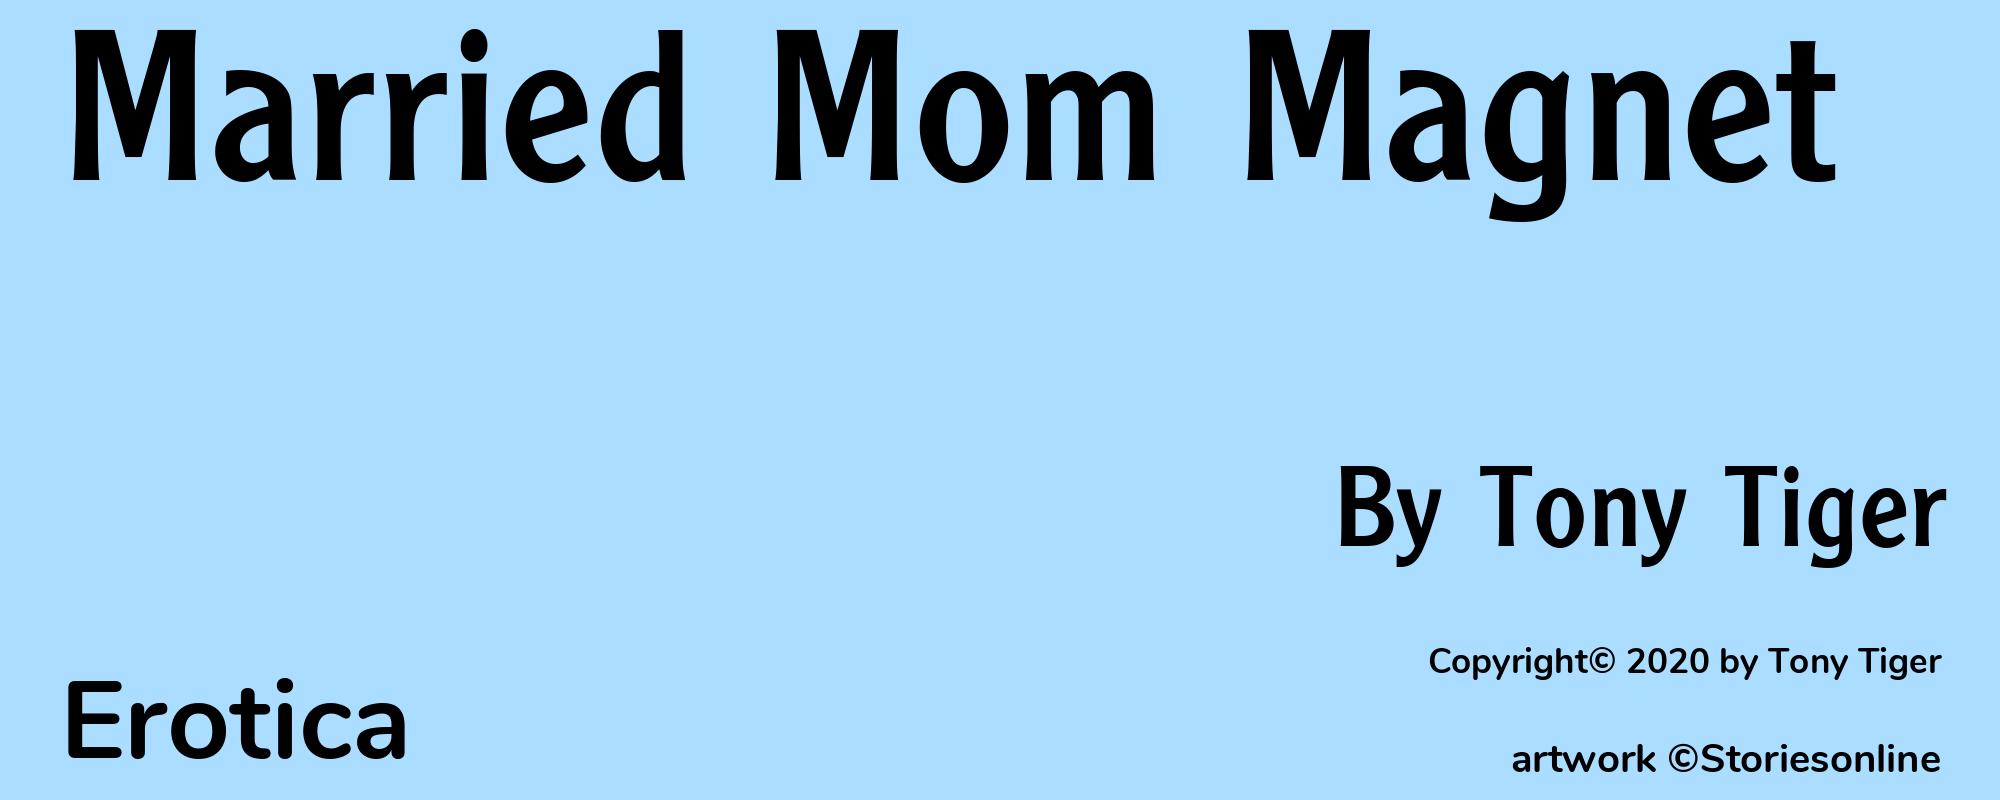 Married Mom Magnet - Cover